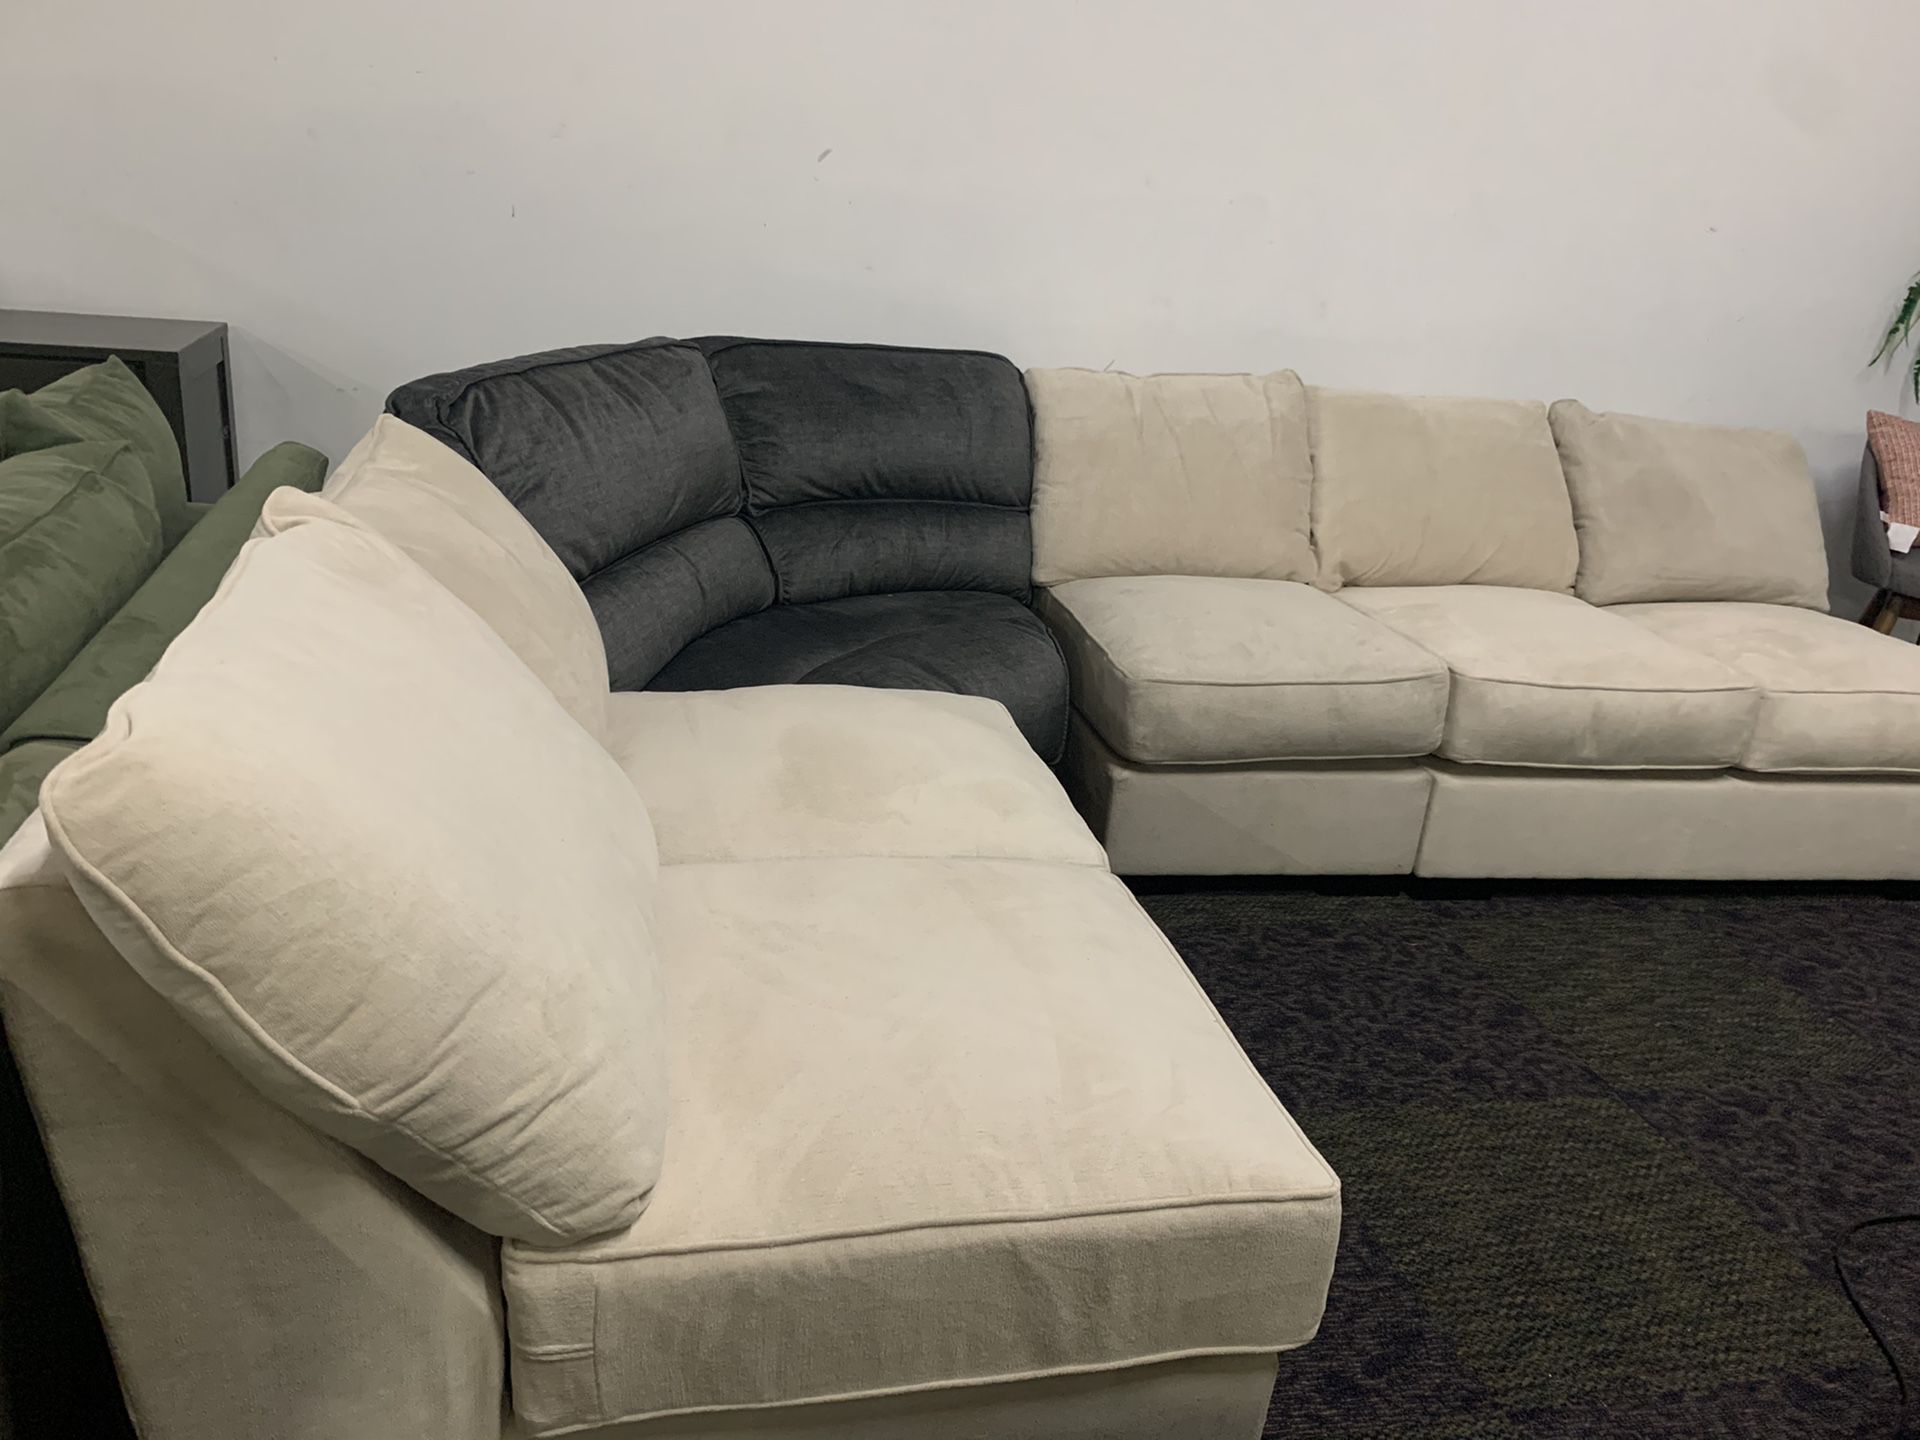 Mix and match 4 piece sectional couch